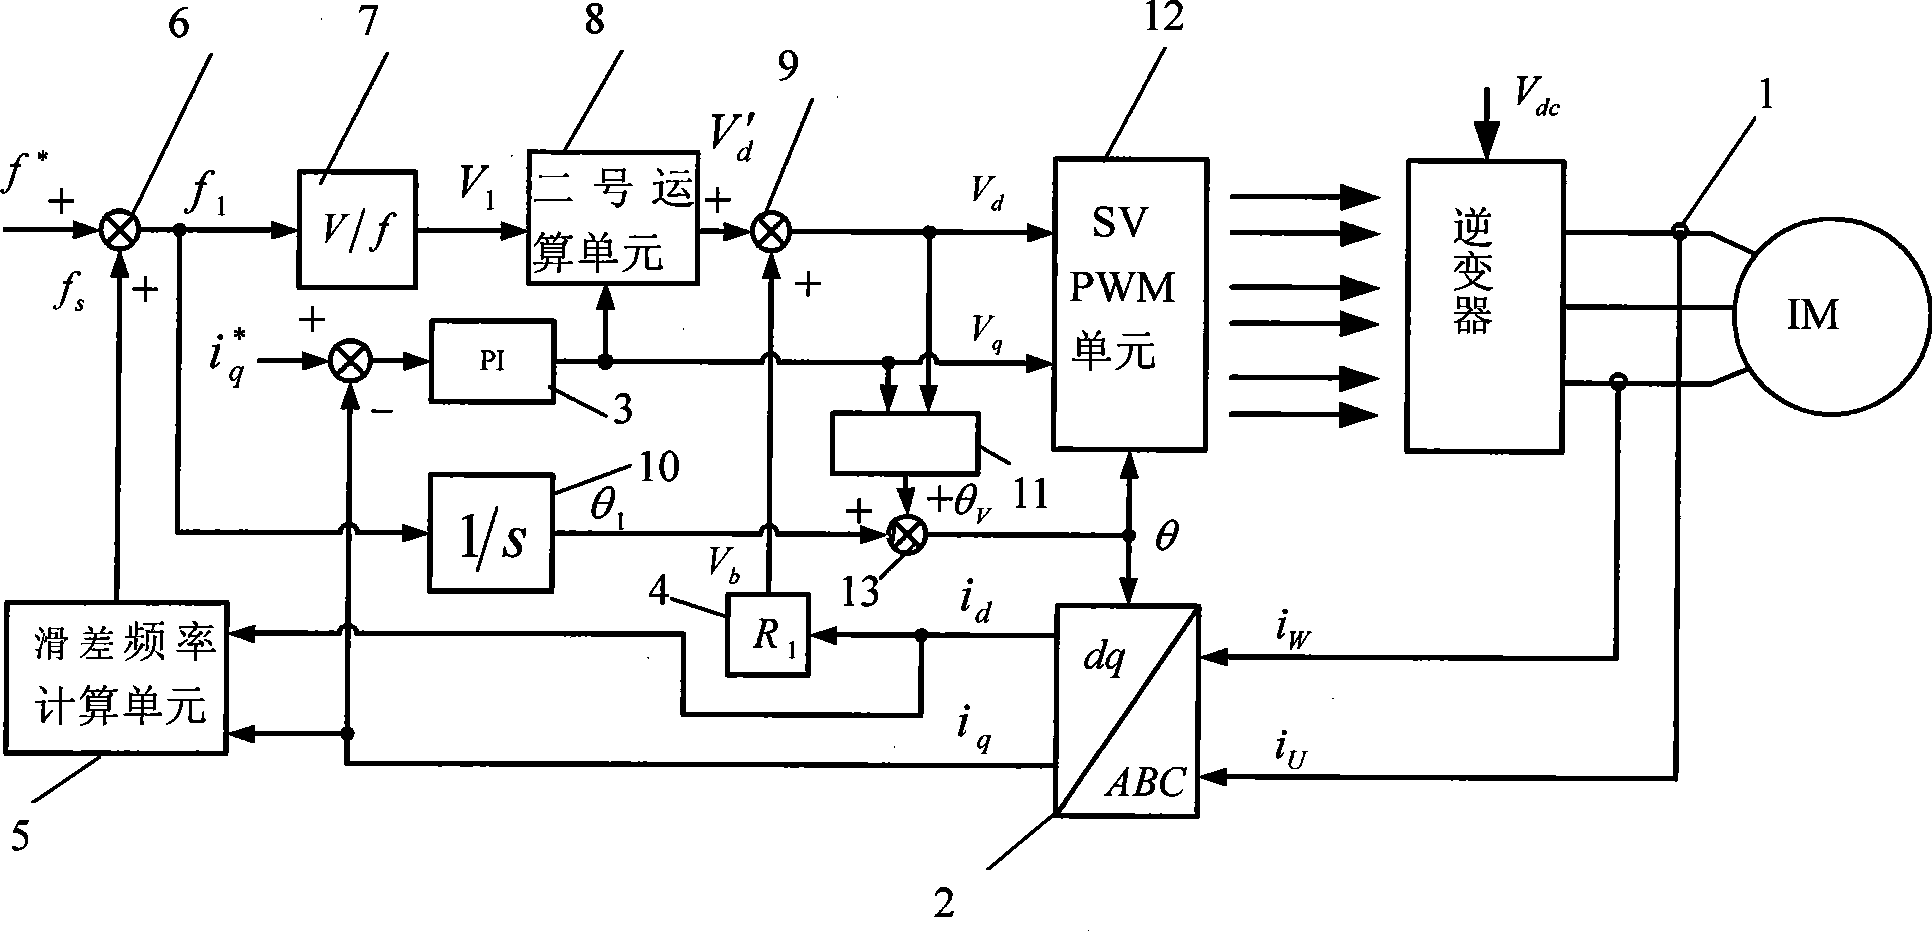 Voltage orienting frequency conversion controller for open loop non-speed sensor